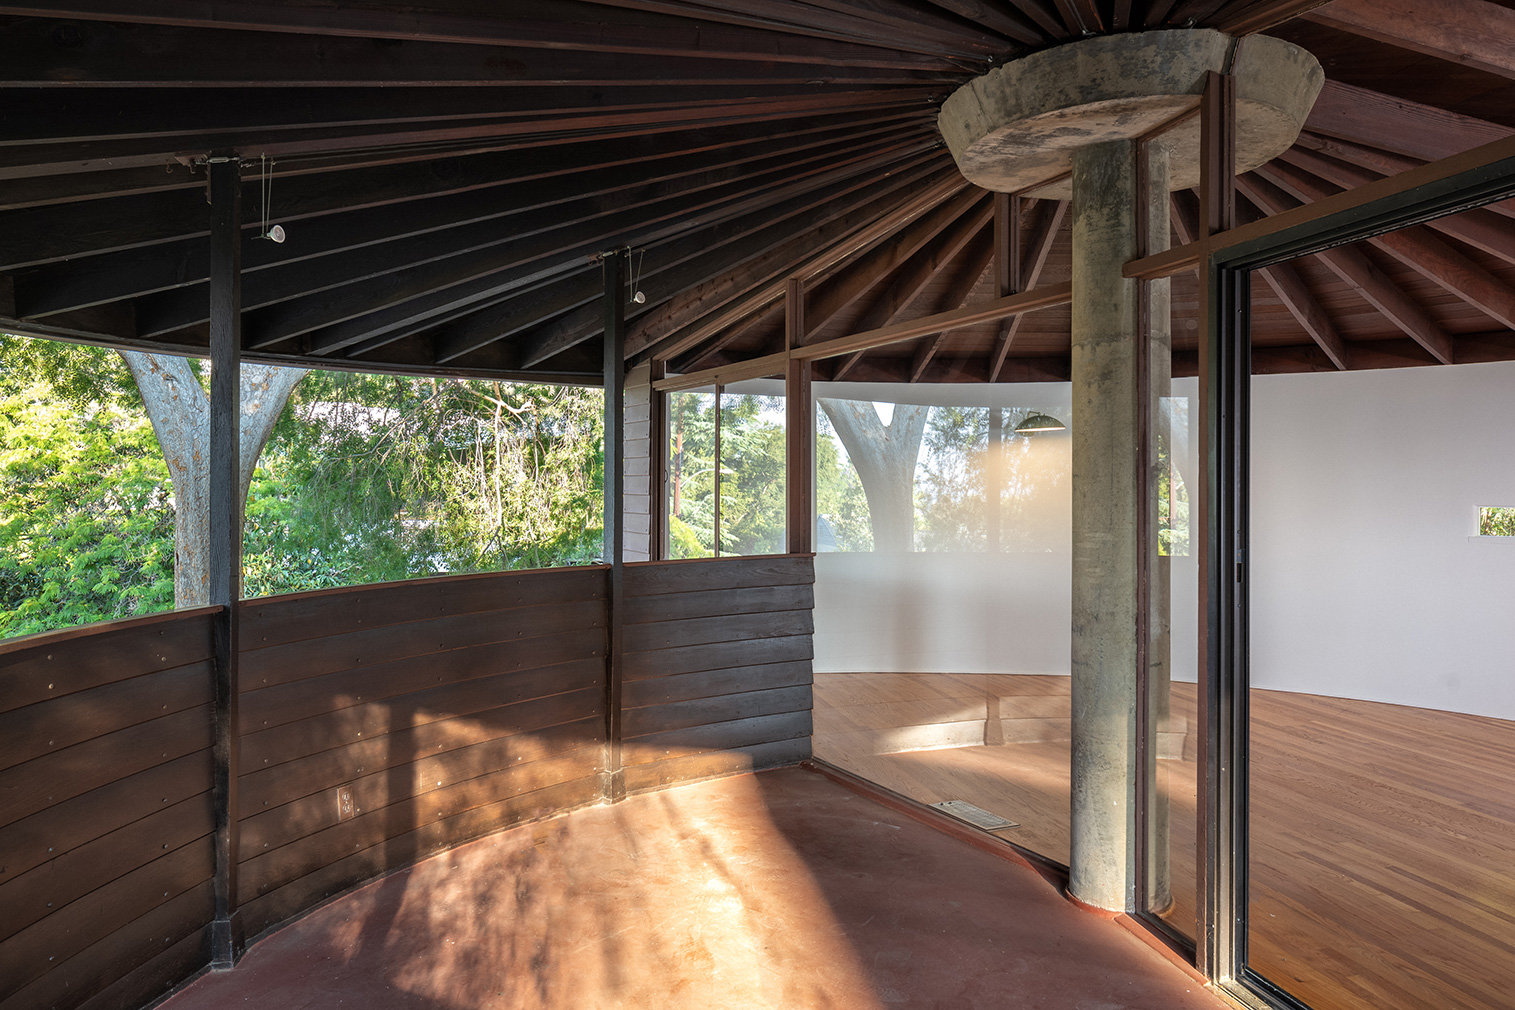 Circular 1950s Louse Foster House by John Lautner hits the market for the first time